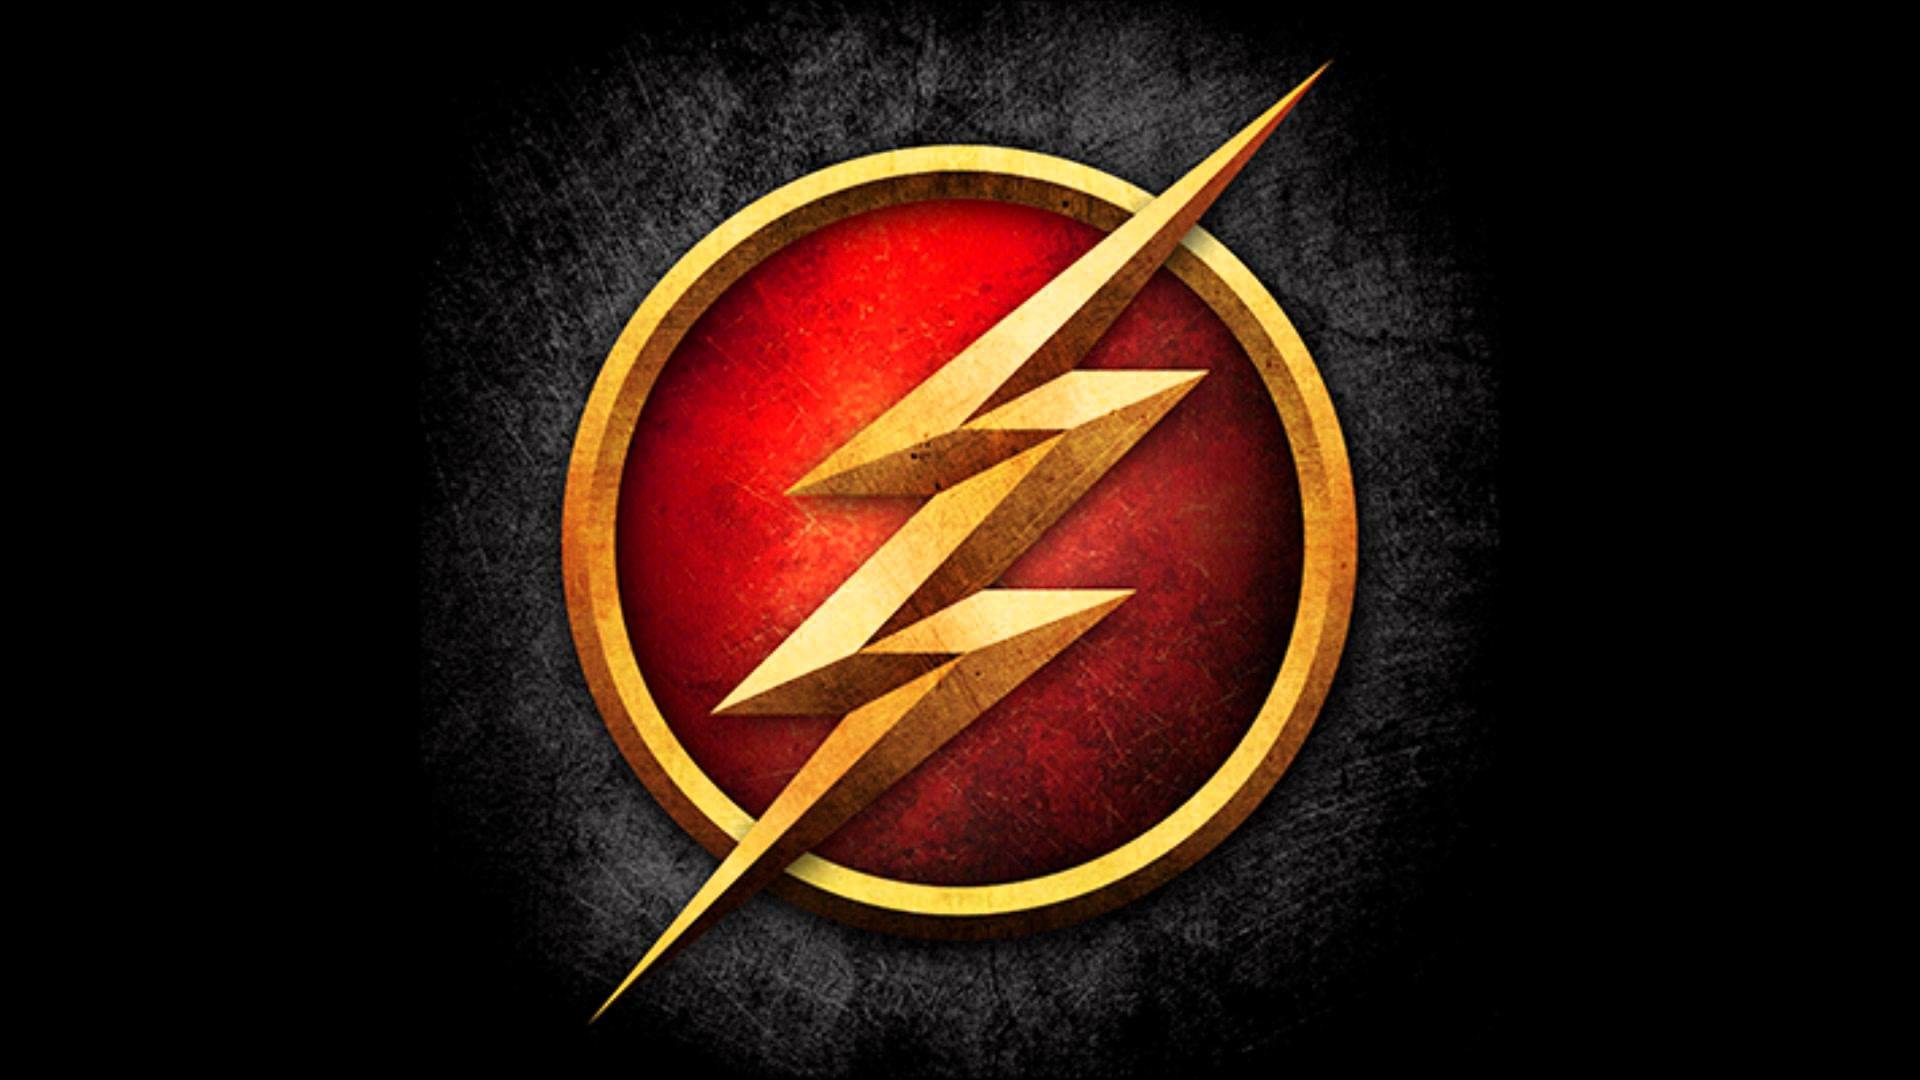 1920x1080 Justice League The Flash Wallpaper Mobile by darkfailure on DeviantArt